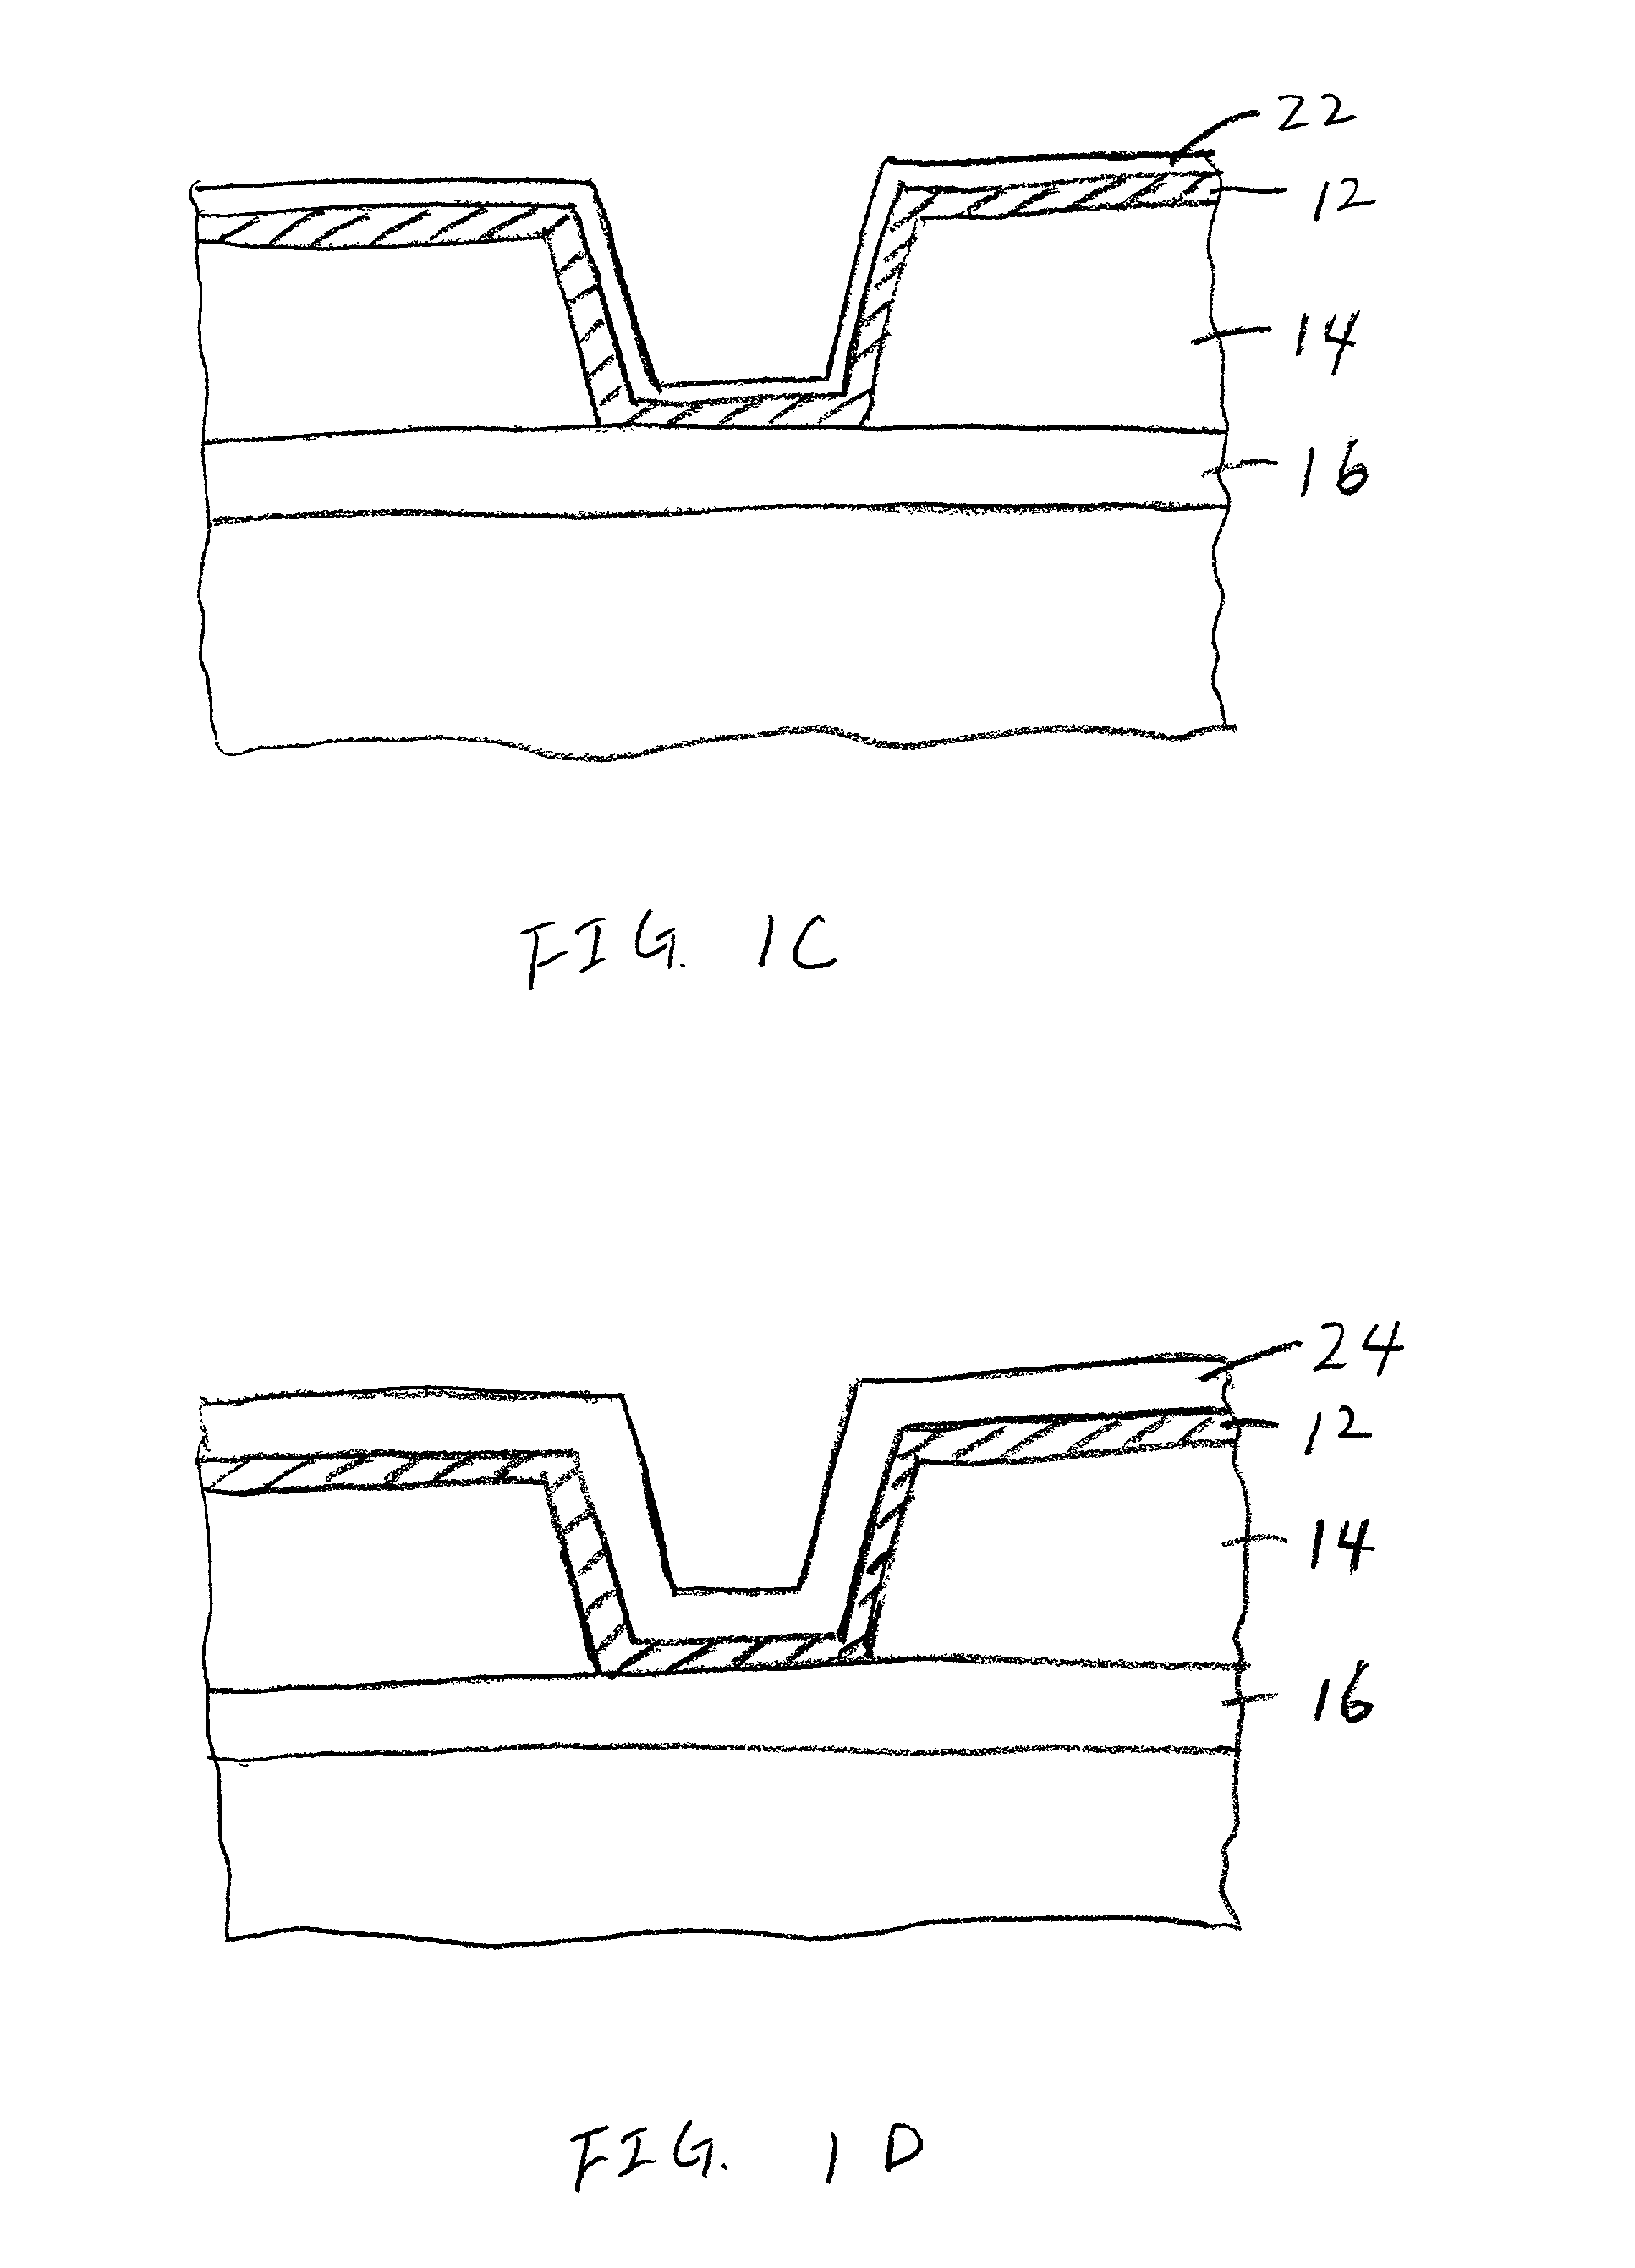 High throughput process for the formation of a refractory metal nucleation layer